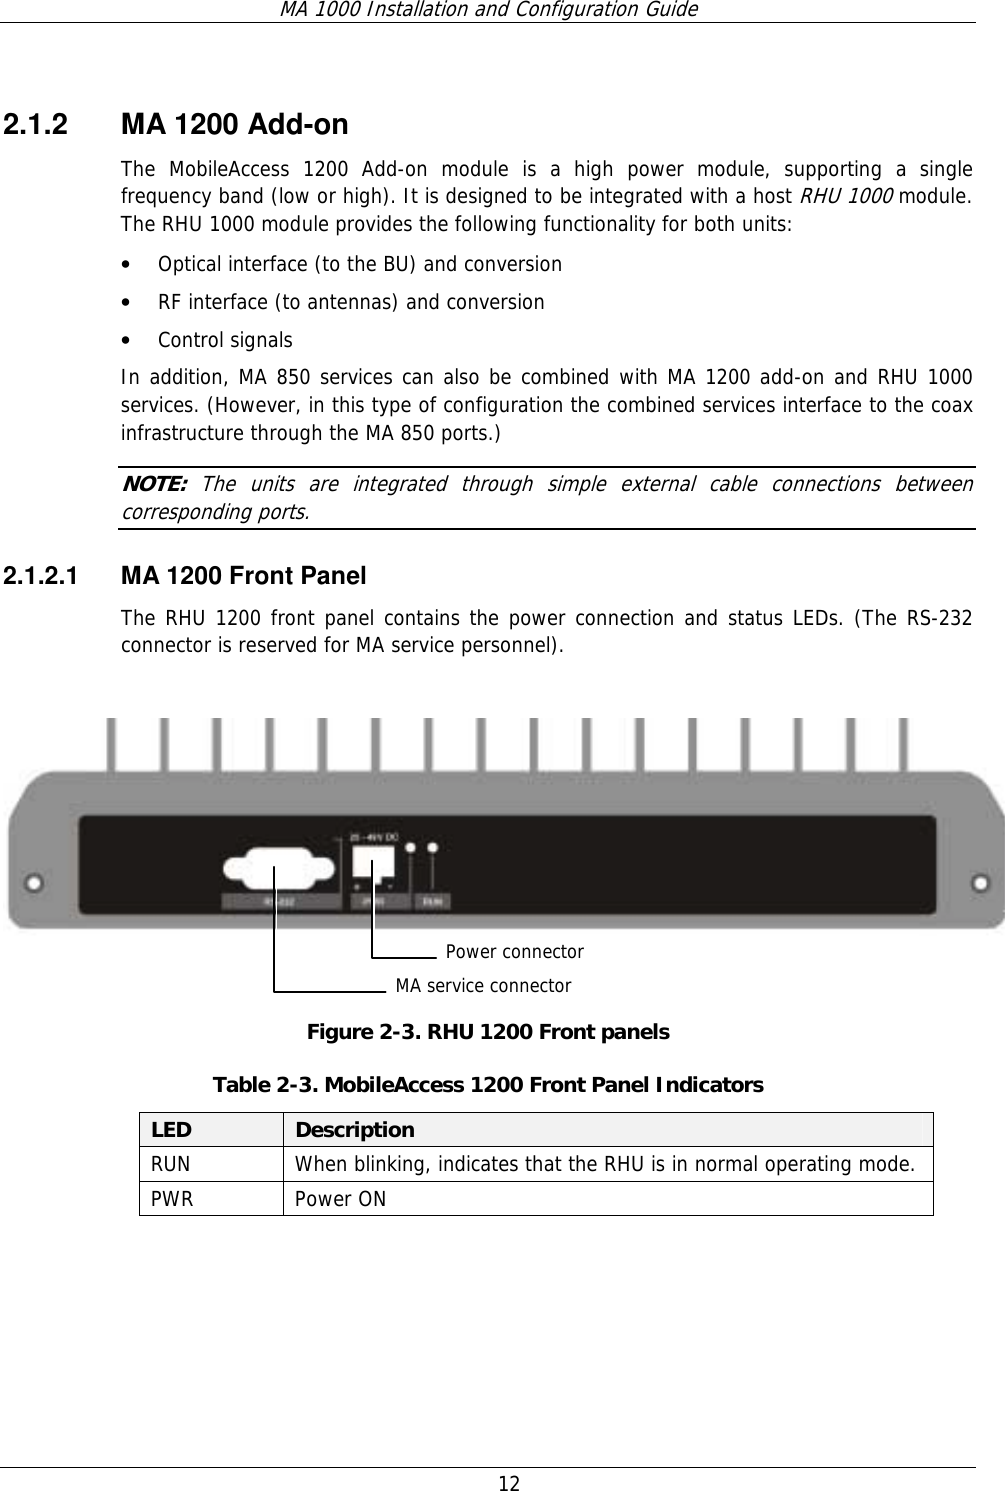 MA 1000 Installation and Configuration Guide  12   2.1.2 MA 1200 Add-on The MobileAccess 1200 Add-on module is a high power module, supporting a single frequency band (low or high). It is designed to be integrated with a host RHU 1000 module. The RHU 1000 module provides the following functionality for both units: • Optical interface (to the BU) and conversion • RF interface (to antennas) and conversion • Control signals  In addition, MA 850 services can also be combined with MA 1200 add-on and RHU 1000 services. (However, in this type of configuration the combined services interface to the coax infrastructure through the MA 850 ports.) NOTE:  The units are integrated through simple external cable connections between corresponding ports. 2.1.2.1  MA 1200 Front Panel The RHU 1200 front panel contains the power connection and status LEDs. (The RS-232 connector is reserved for MA service personnel).     Figure  2-3. RHU 1200 Front panels Table  2-3. MobileAccess 1200 Front Panel Indicators LED  Description RUN  When blinking, indicates that the RHU is in normal operating mode. PWR Power ON  MA service connectorPower connector